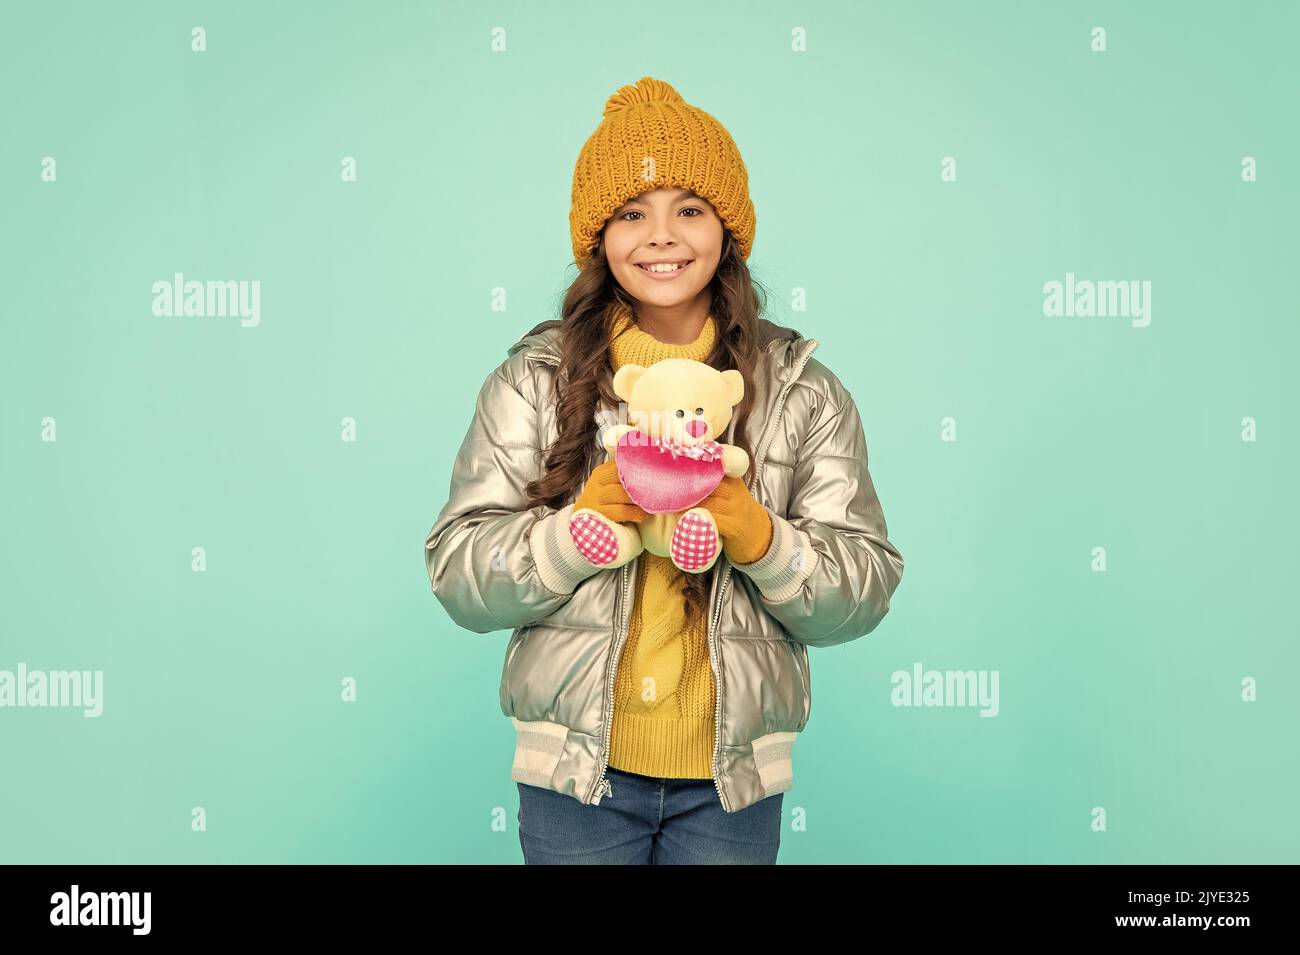 express positive emotion. winter fashion. love toy for valentines day. glad kid Stock Photo